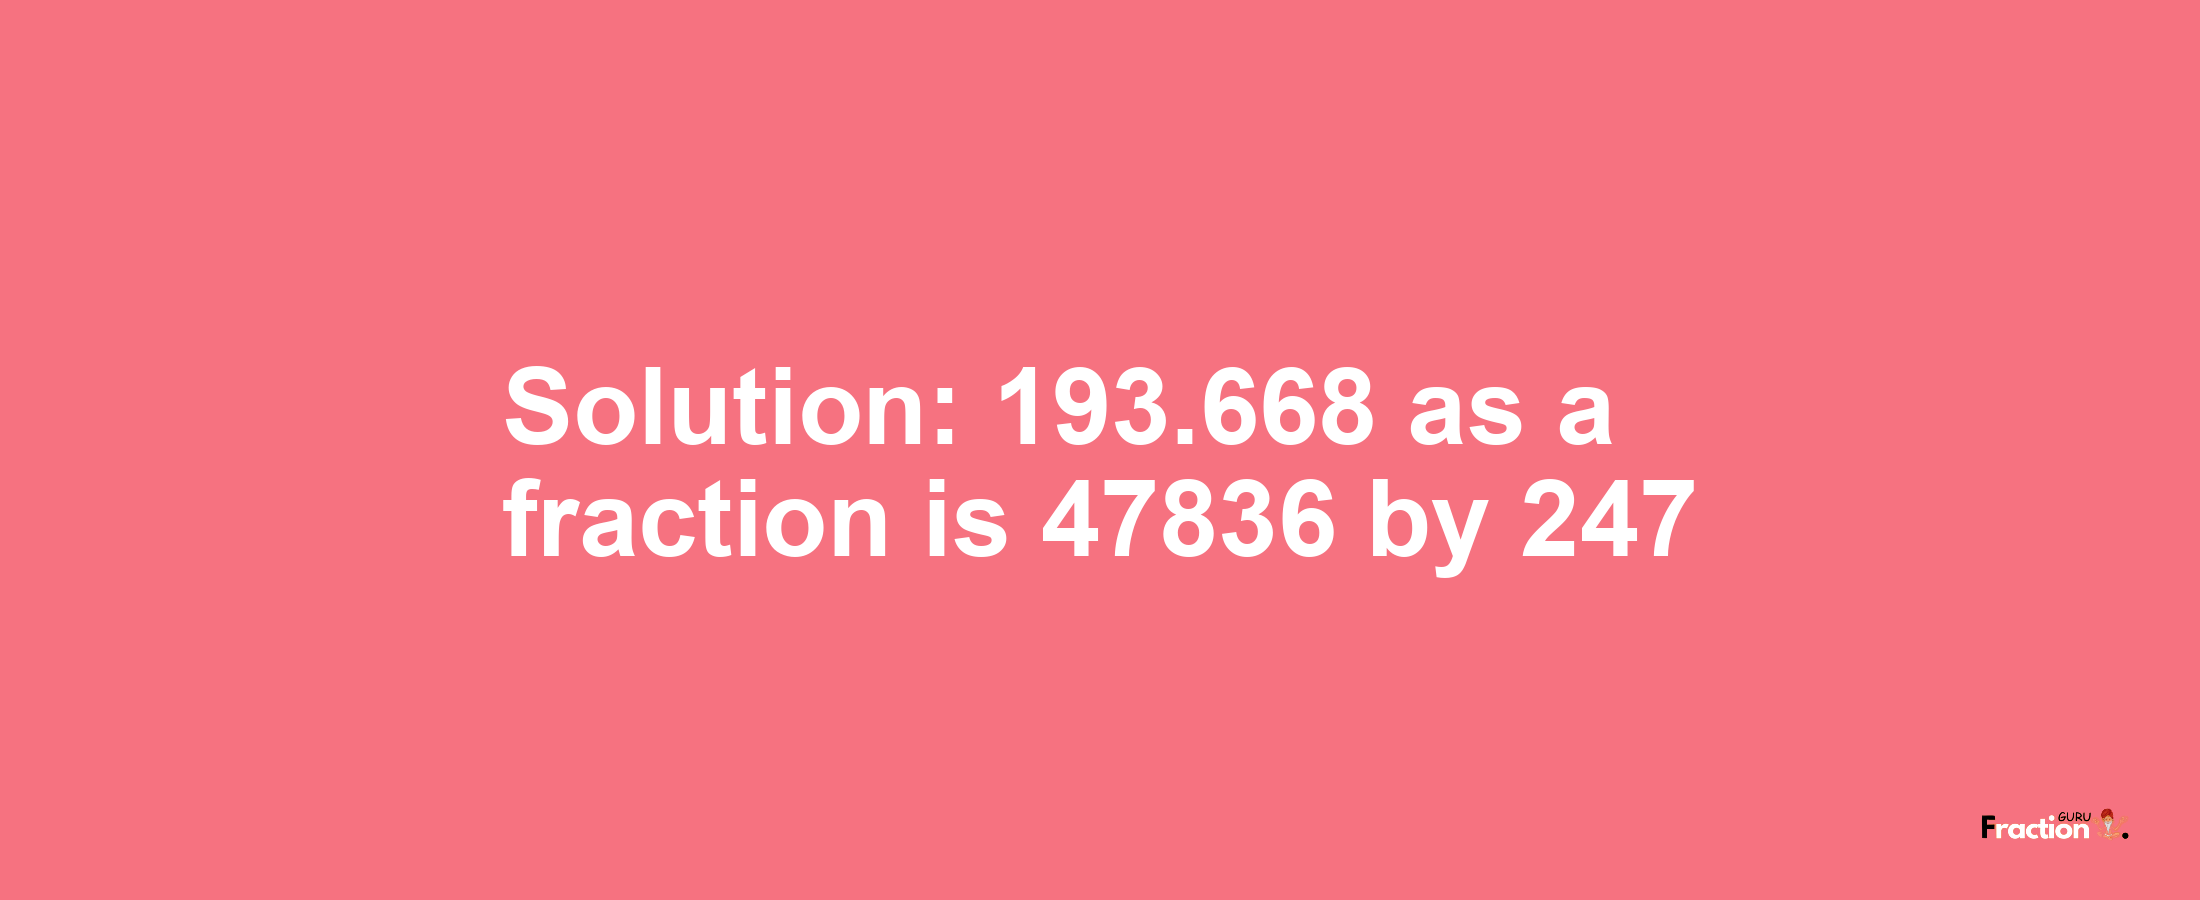 Solution:193.668 as a fraction is 47836/247